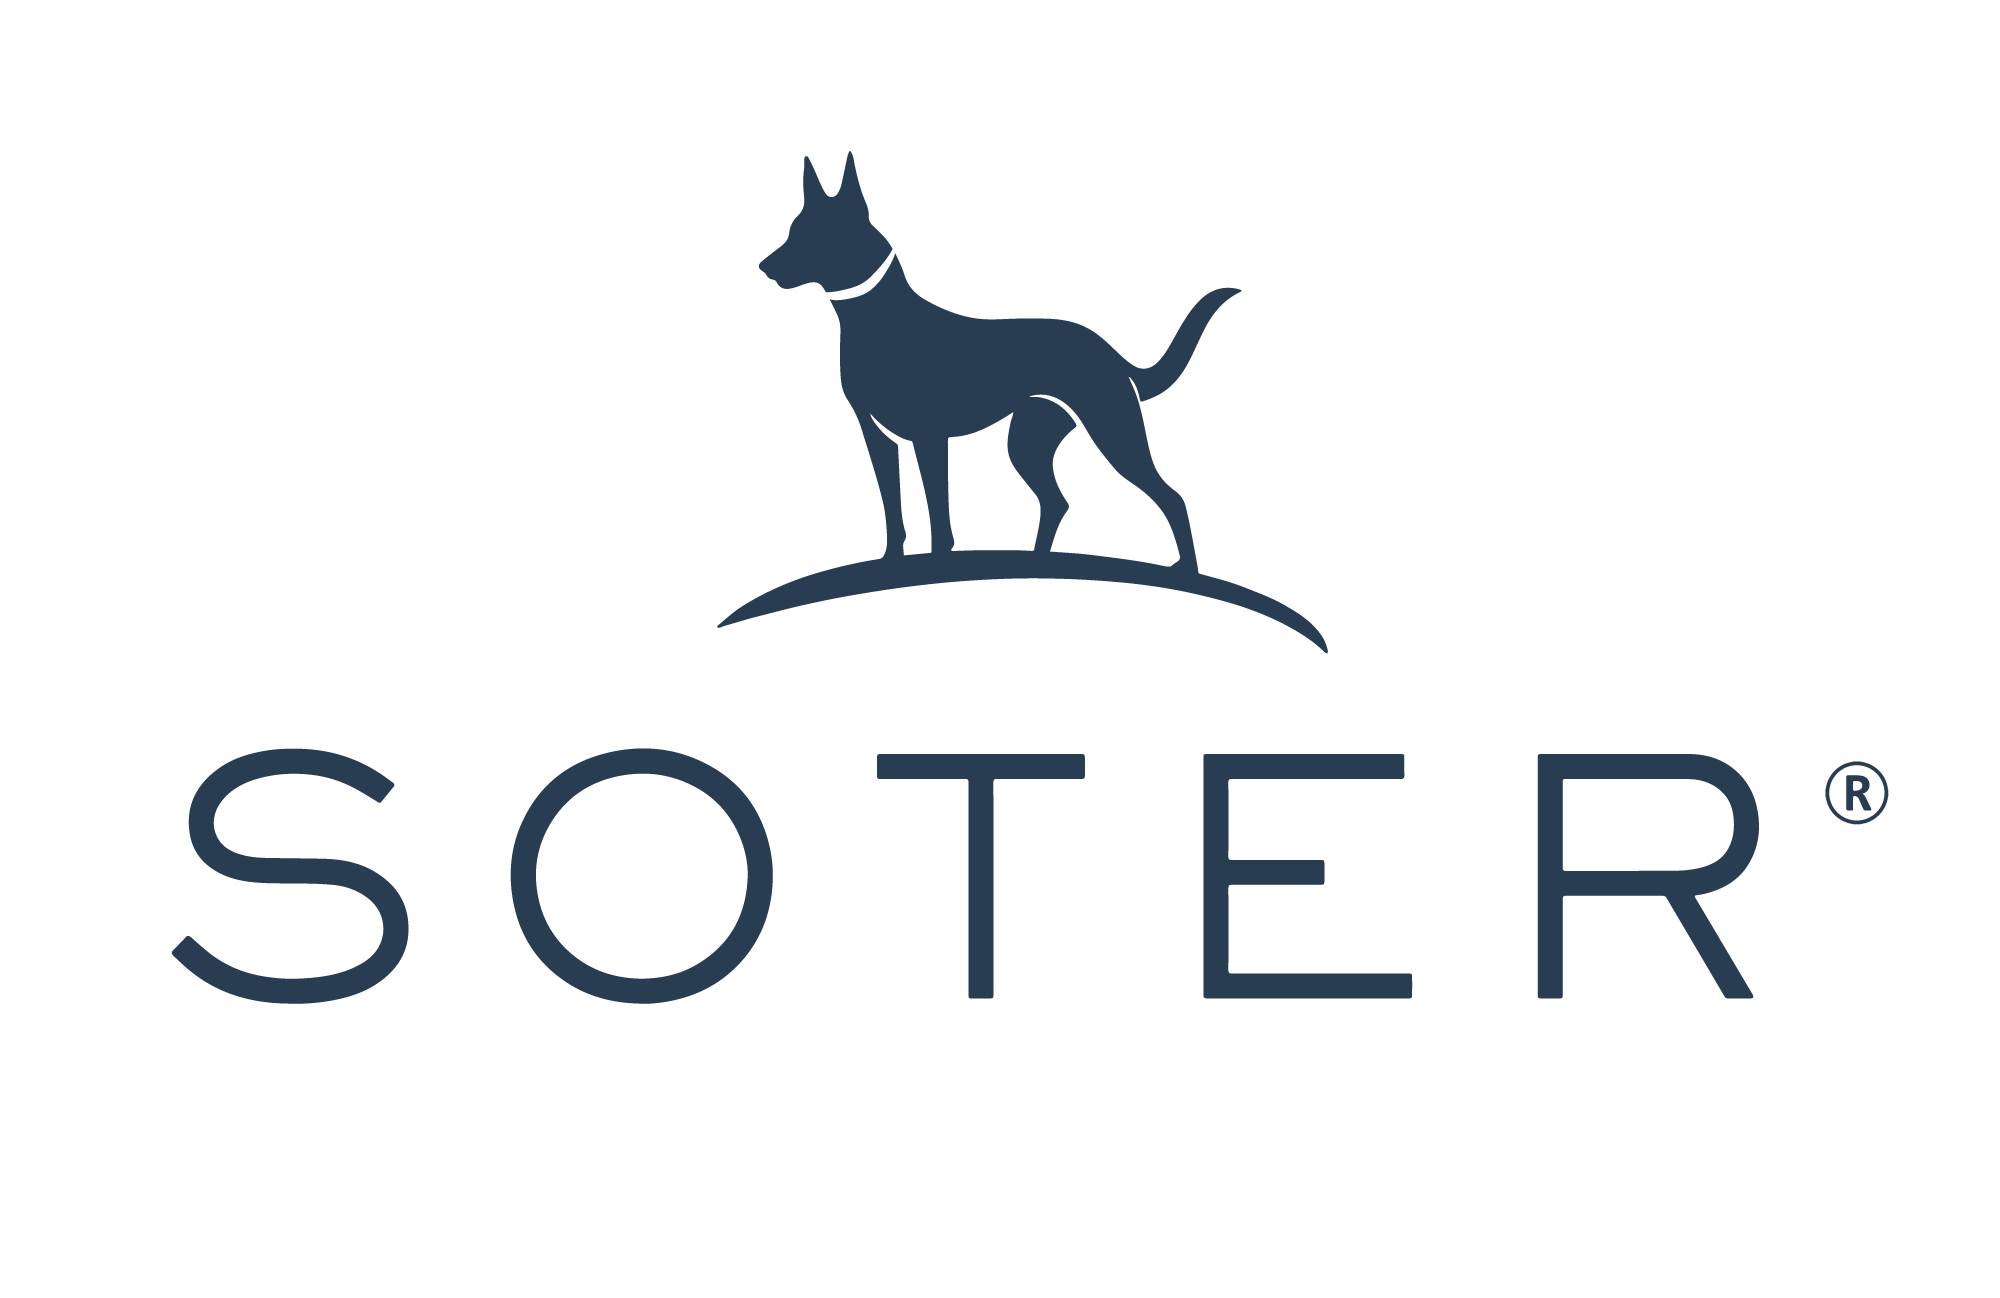 Soter